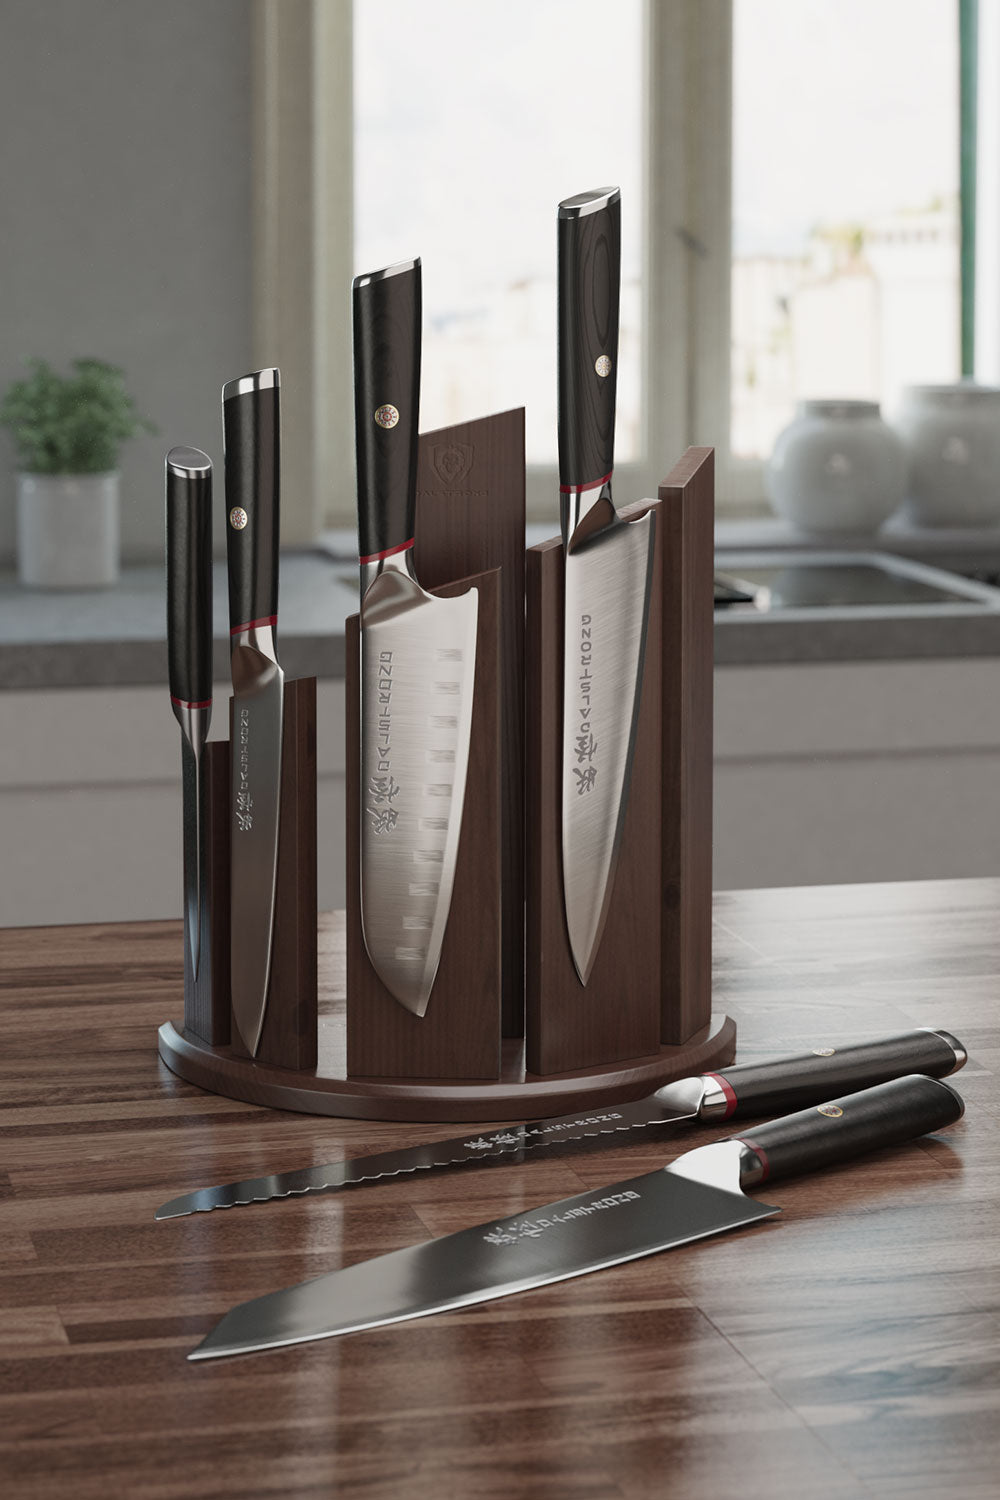 Dalstrong Knife Block Set - 6-Piece w/Magnetic Knife Stand - Phantom Series - Japanese High-Carbon - Aus8 Steel - Pakkawood Handle